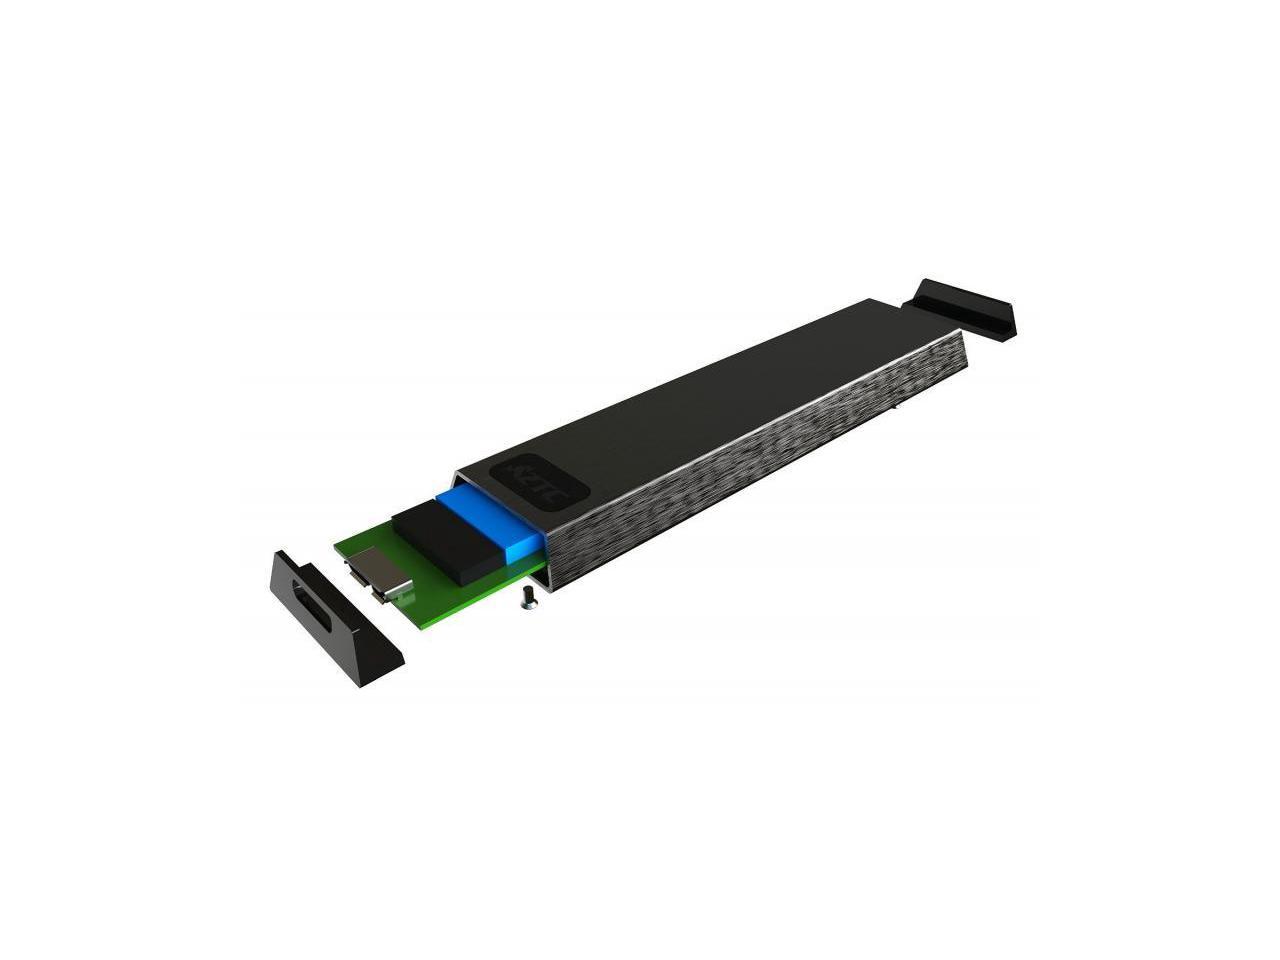 ZTC Thunder Enclosure NGFF M.2 SSD to USB 3.0 - Aluminum Shell, 5 Size Board - High Speed 6GB/s